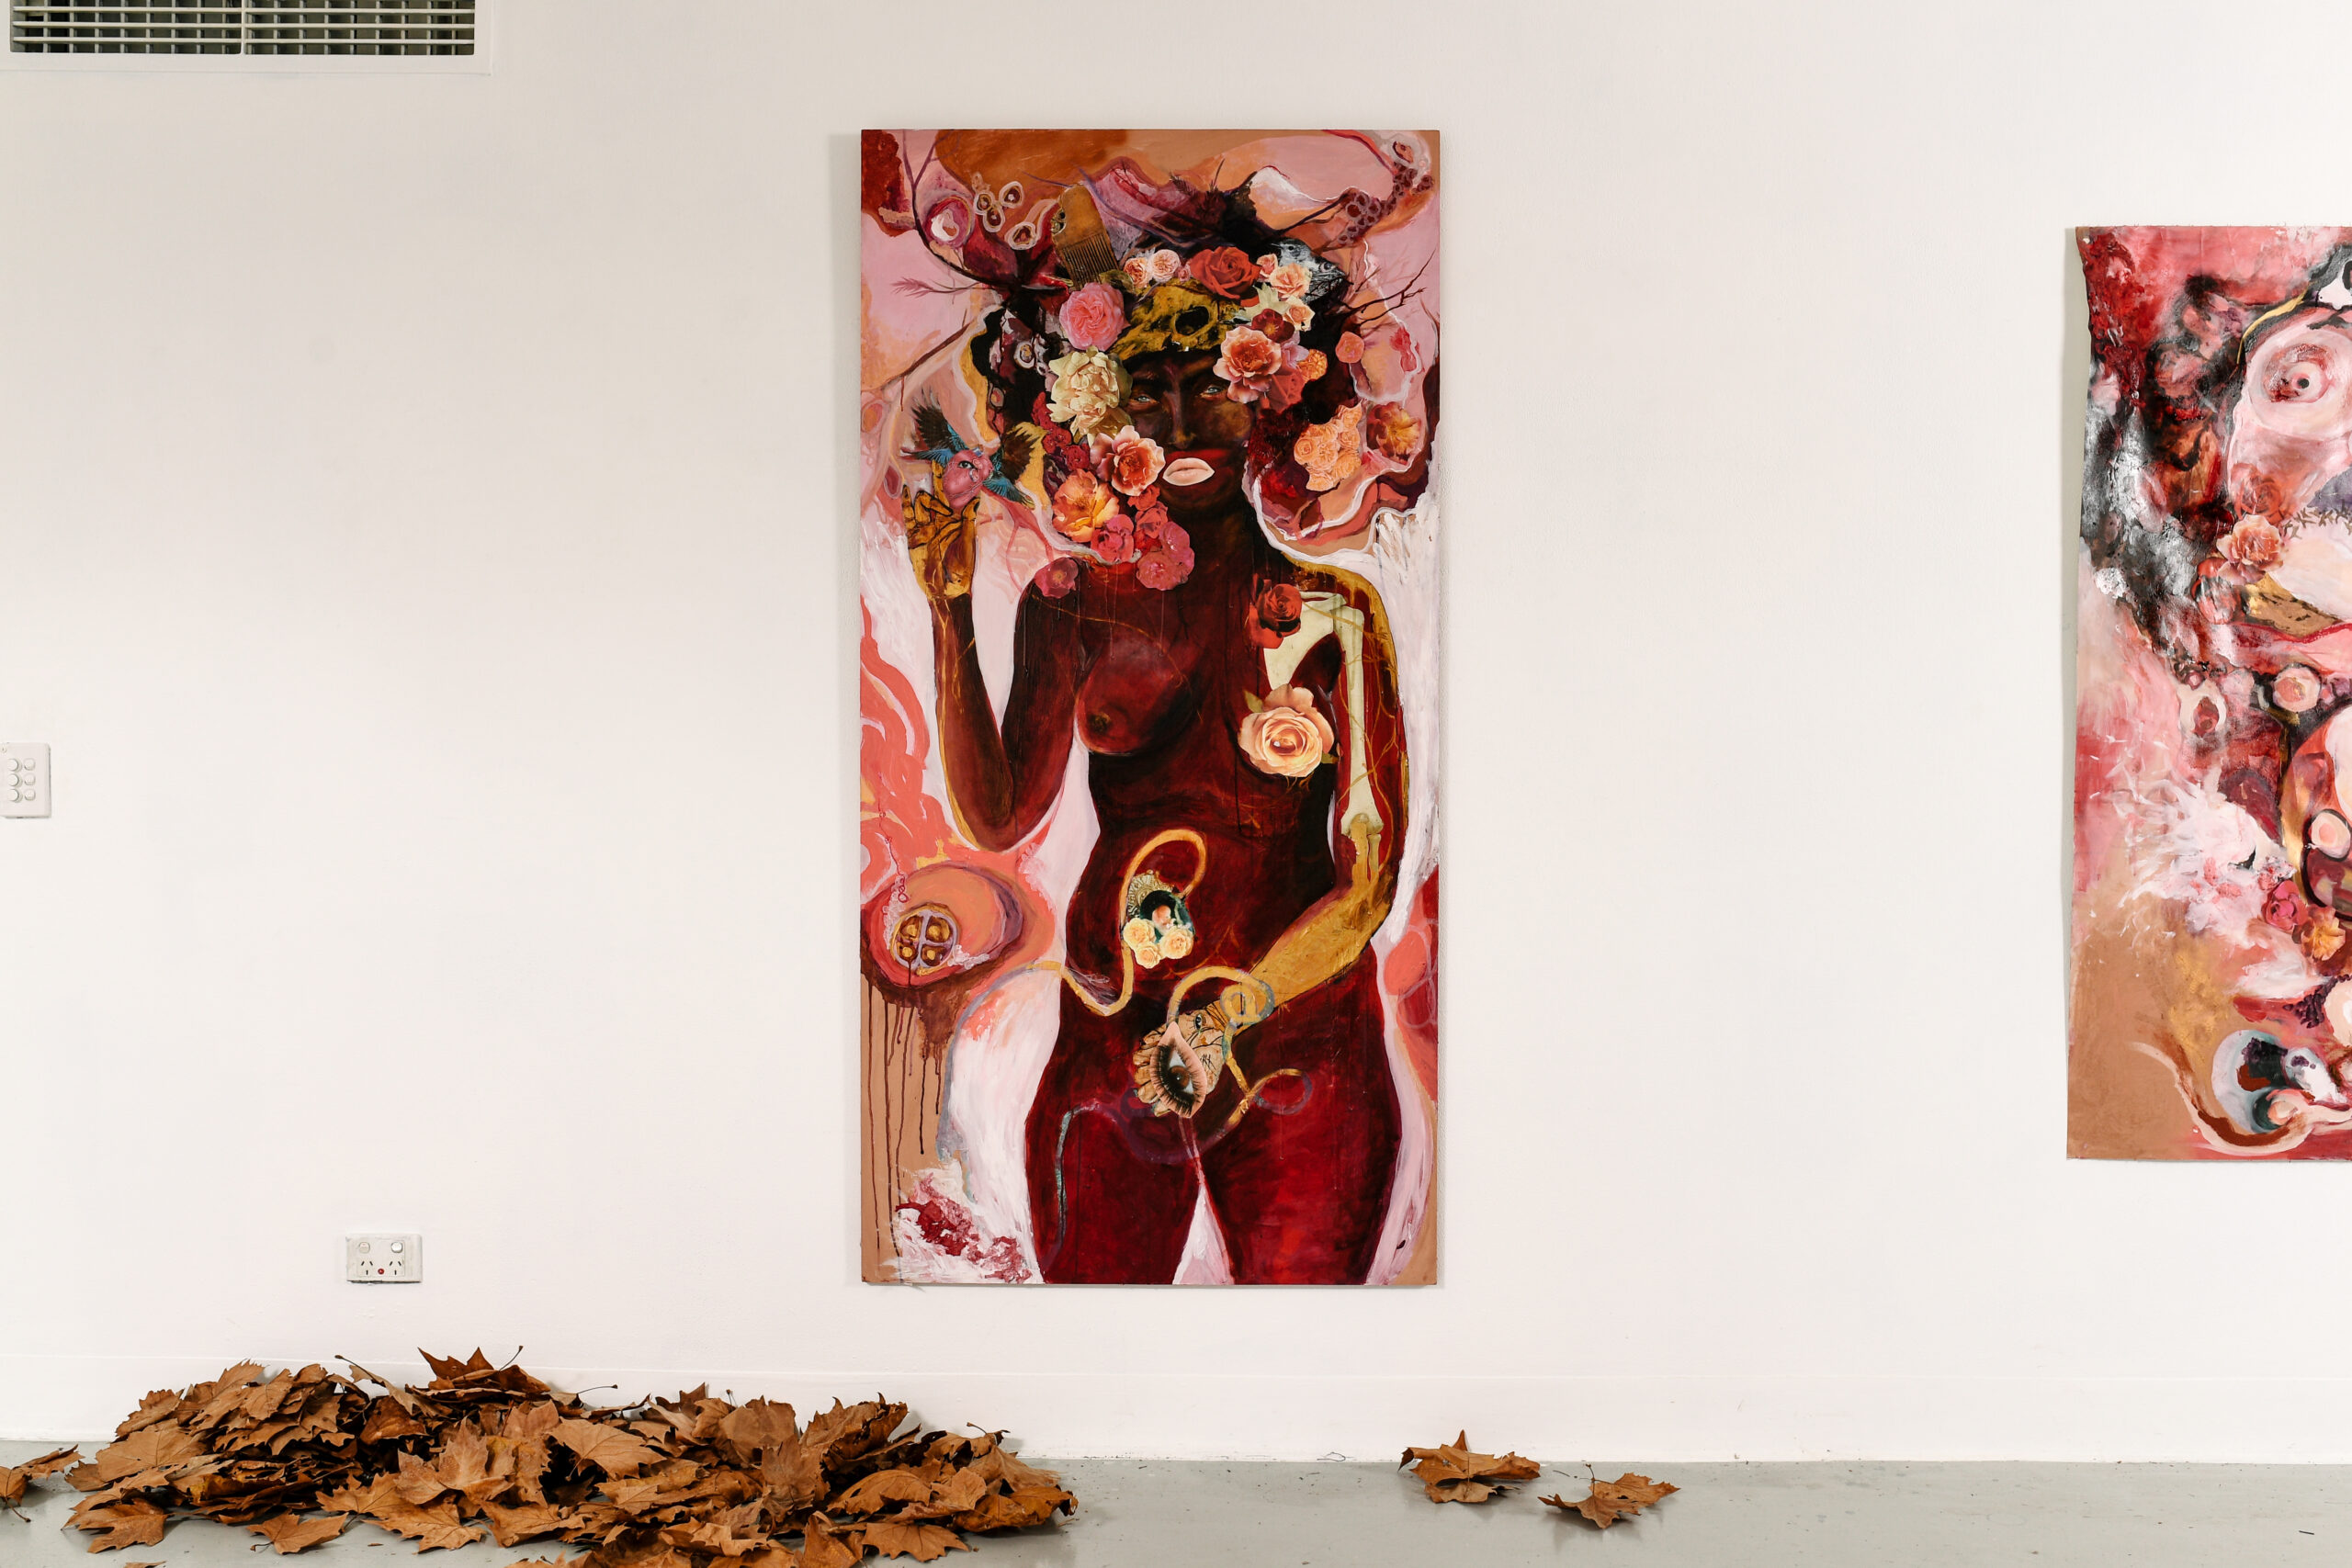 A large unframed painting of a naked black person surrounded by a flower head garland of reds, pinks, beige and rose colours.